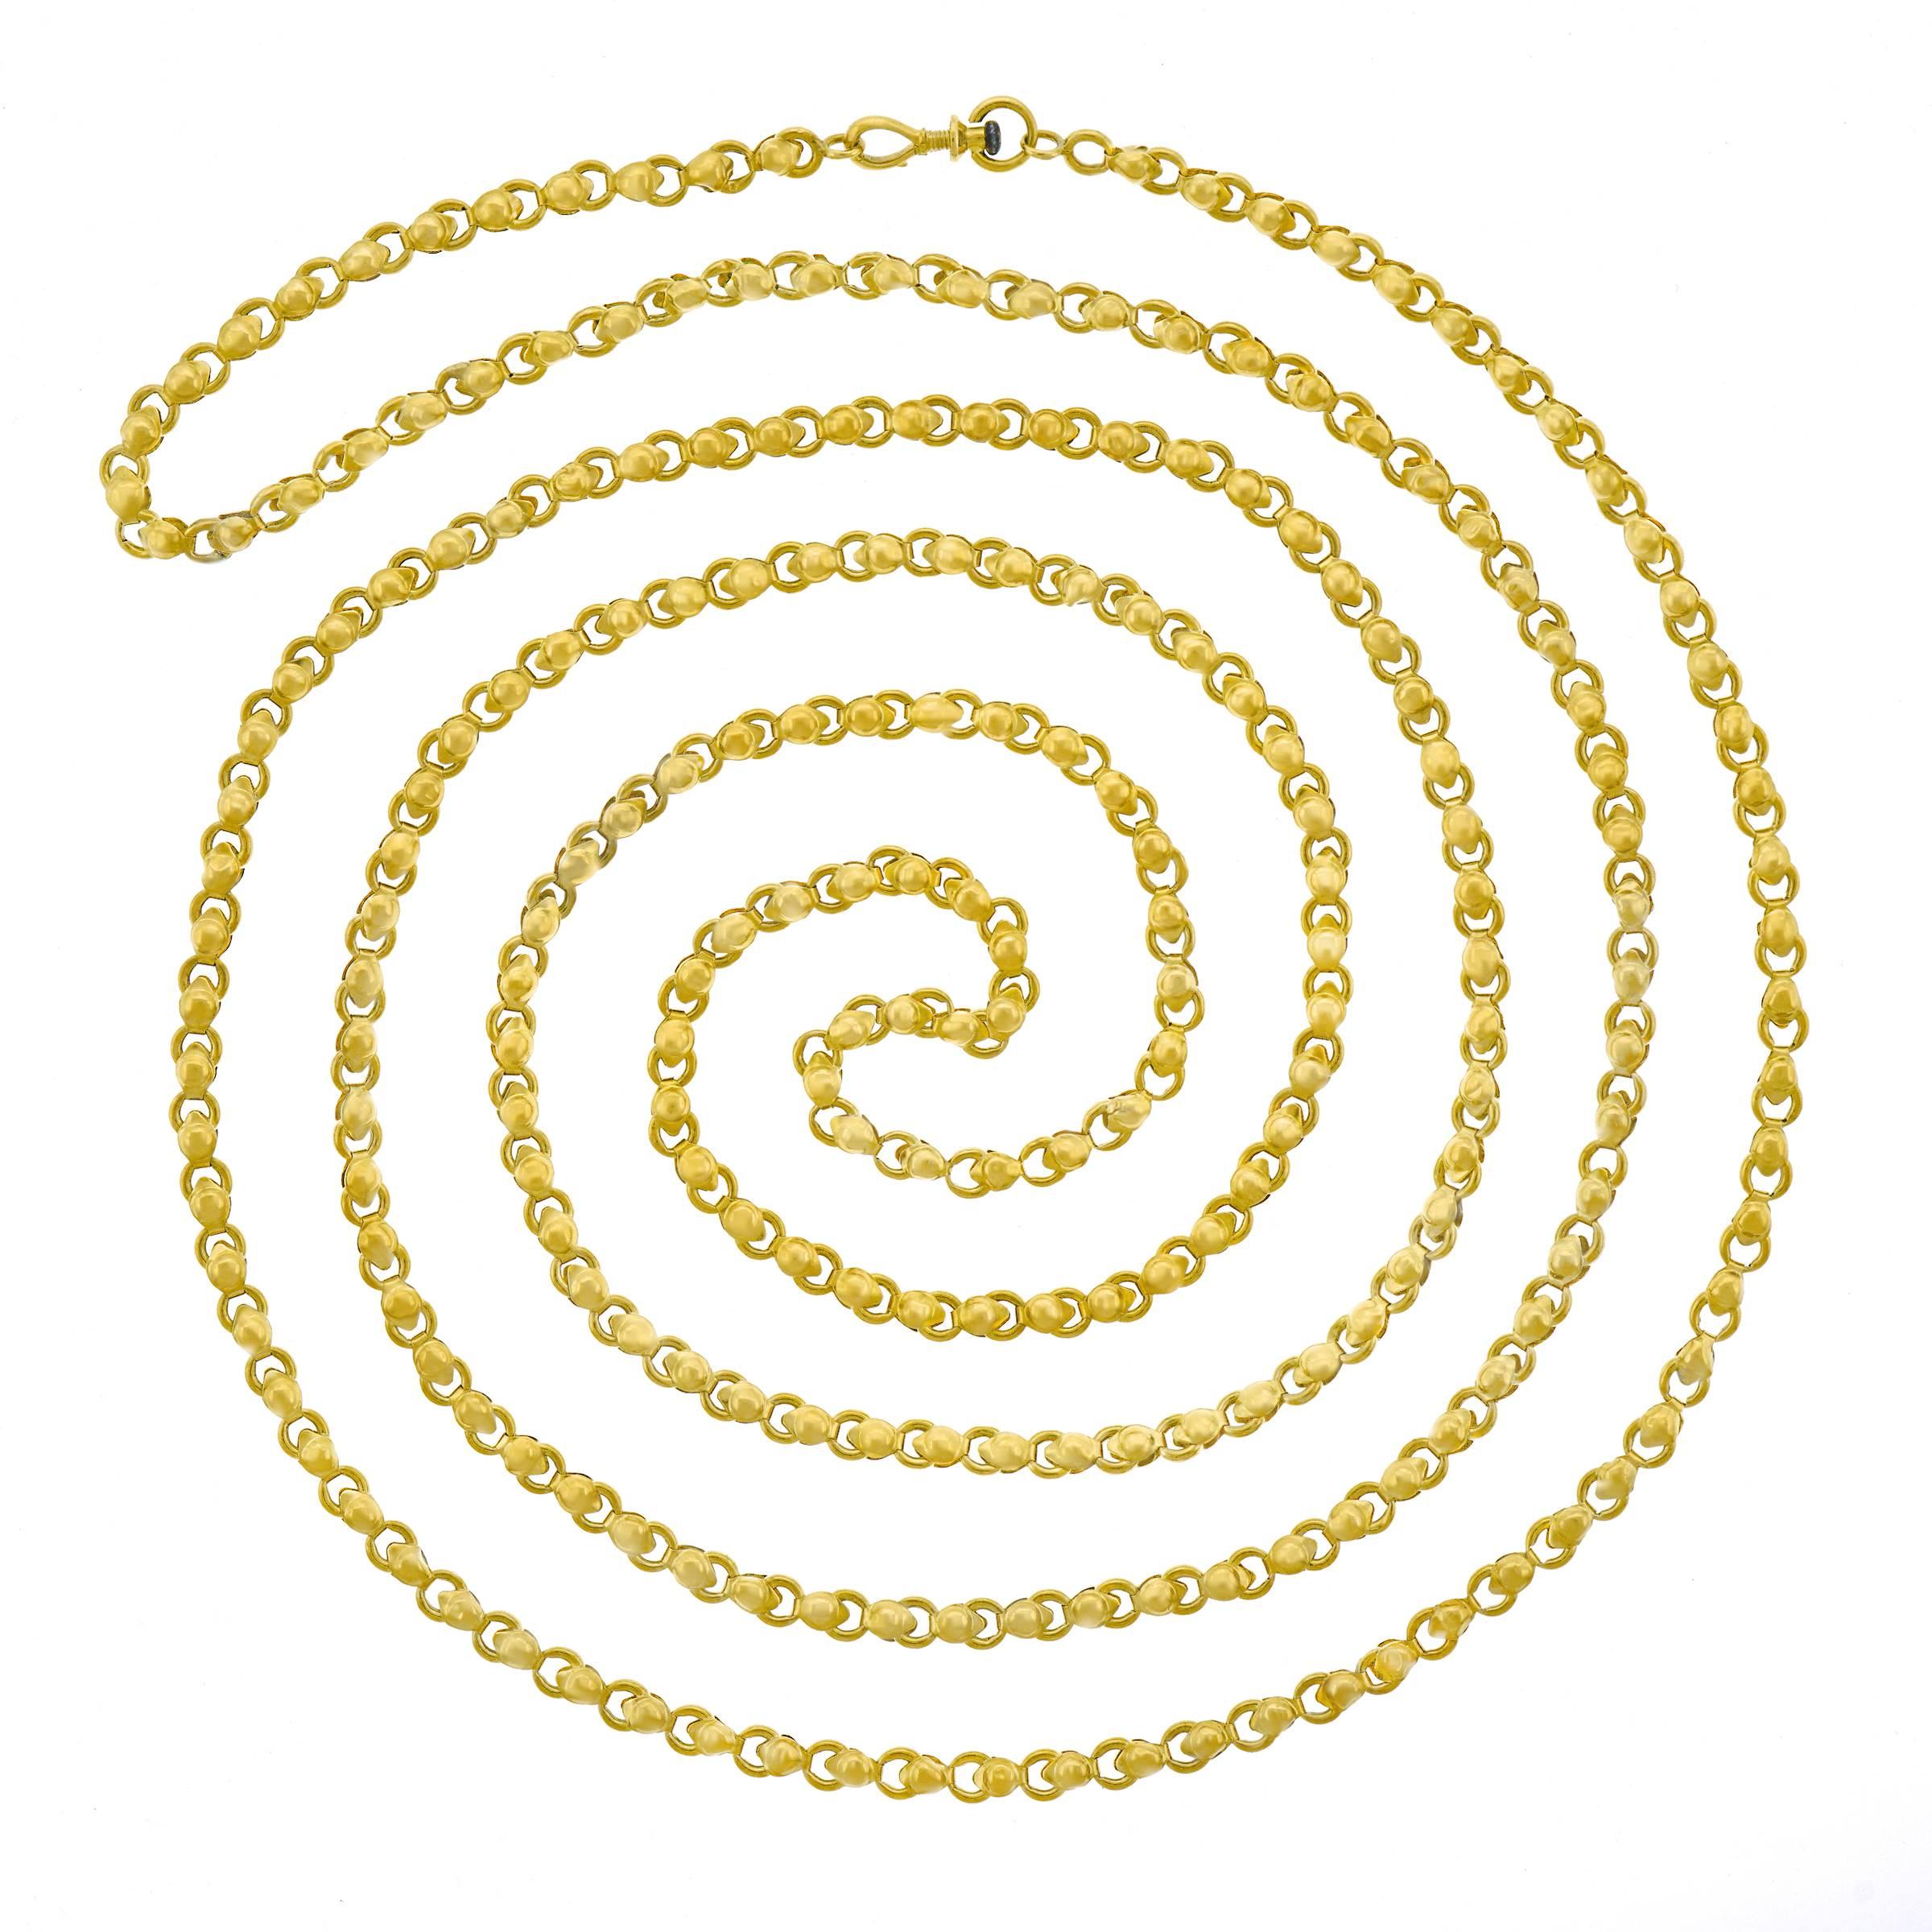 62 Inch Antique French Gold Chain Necklace